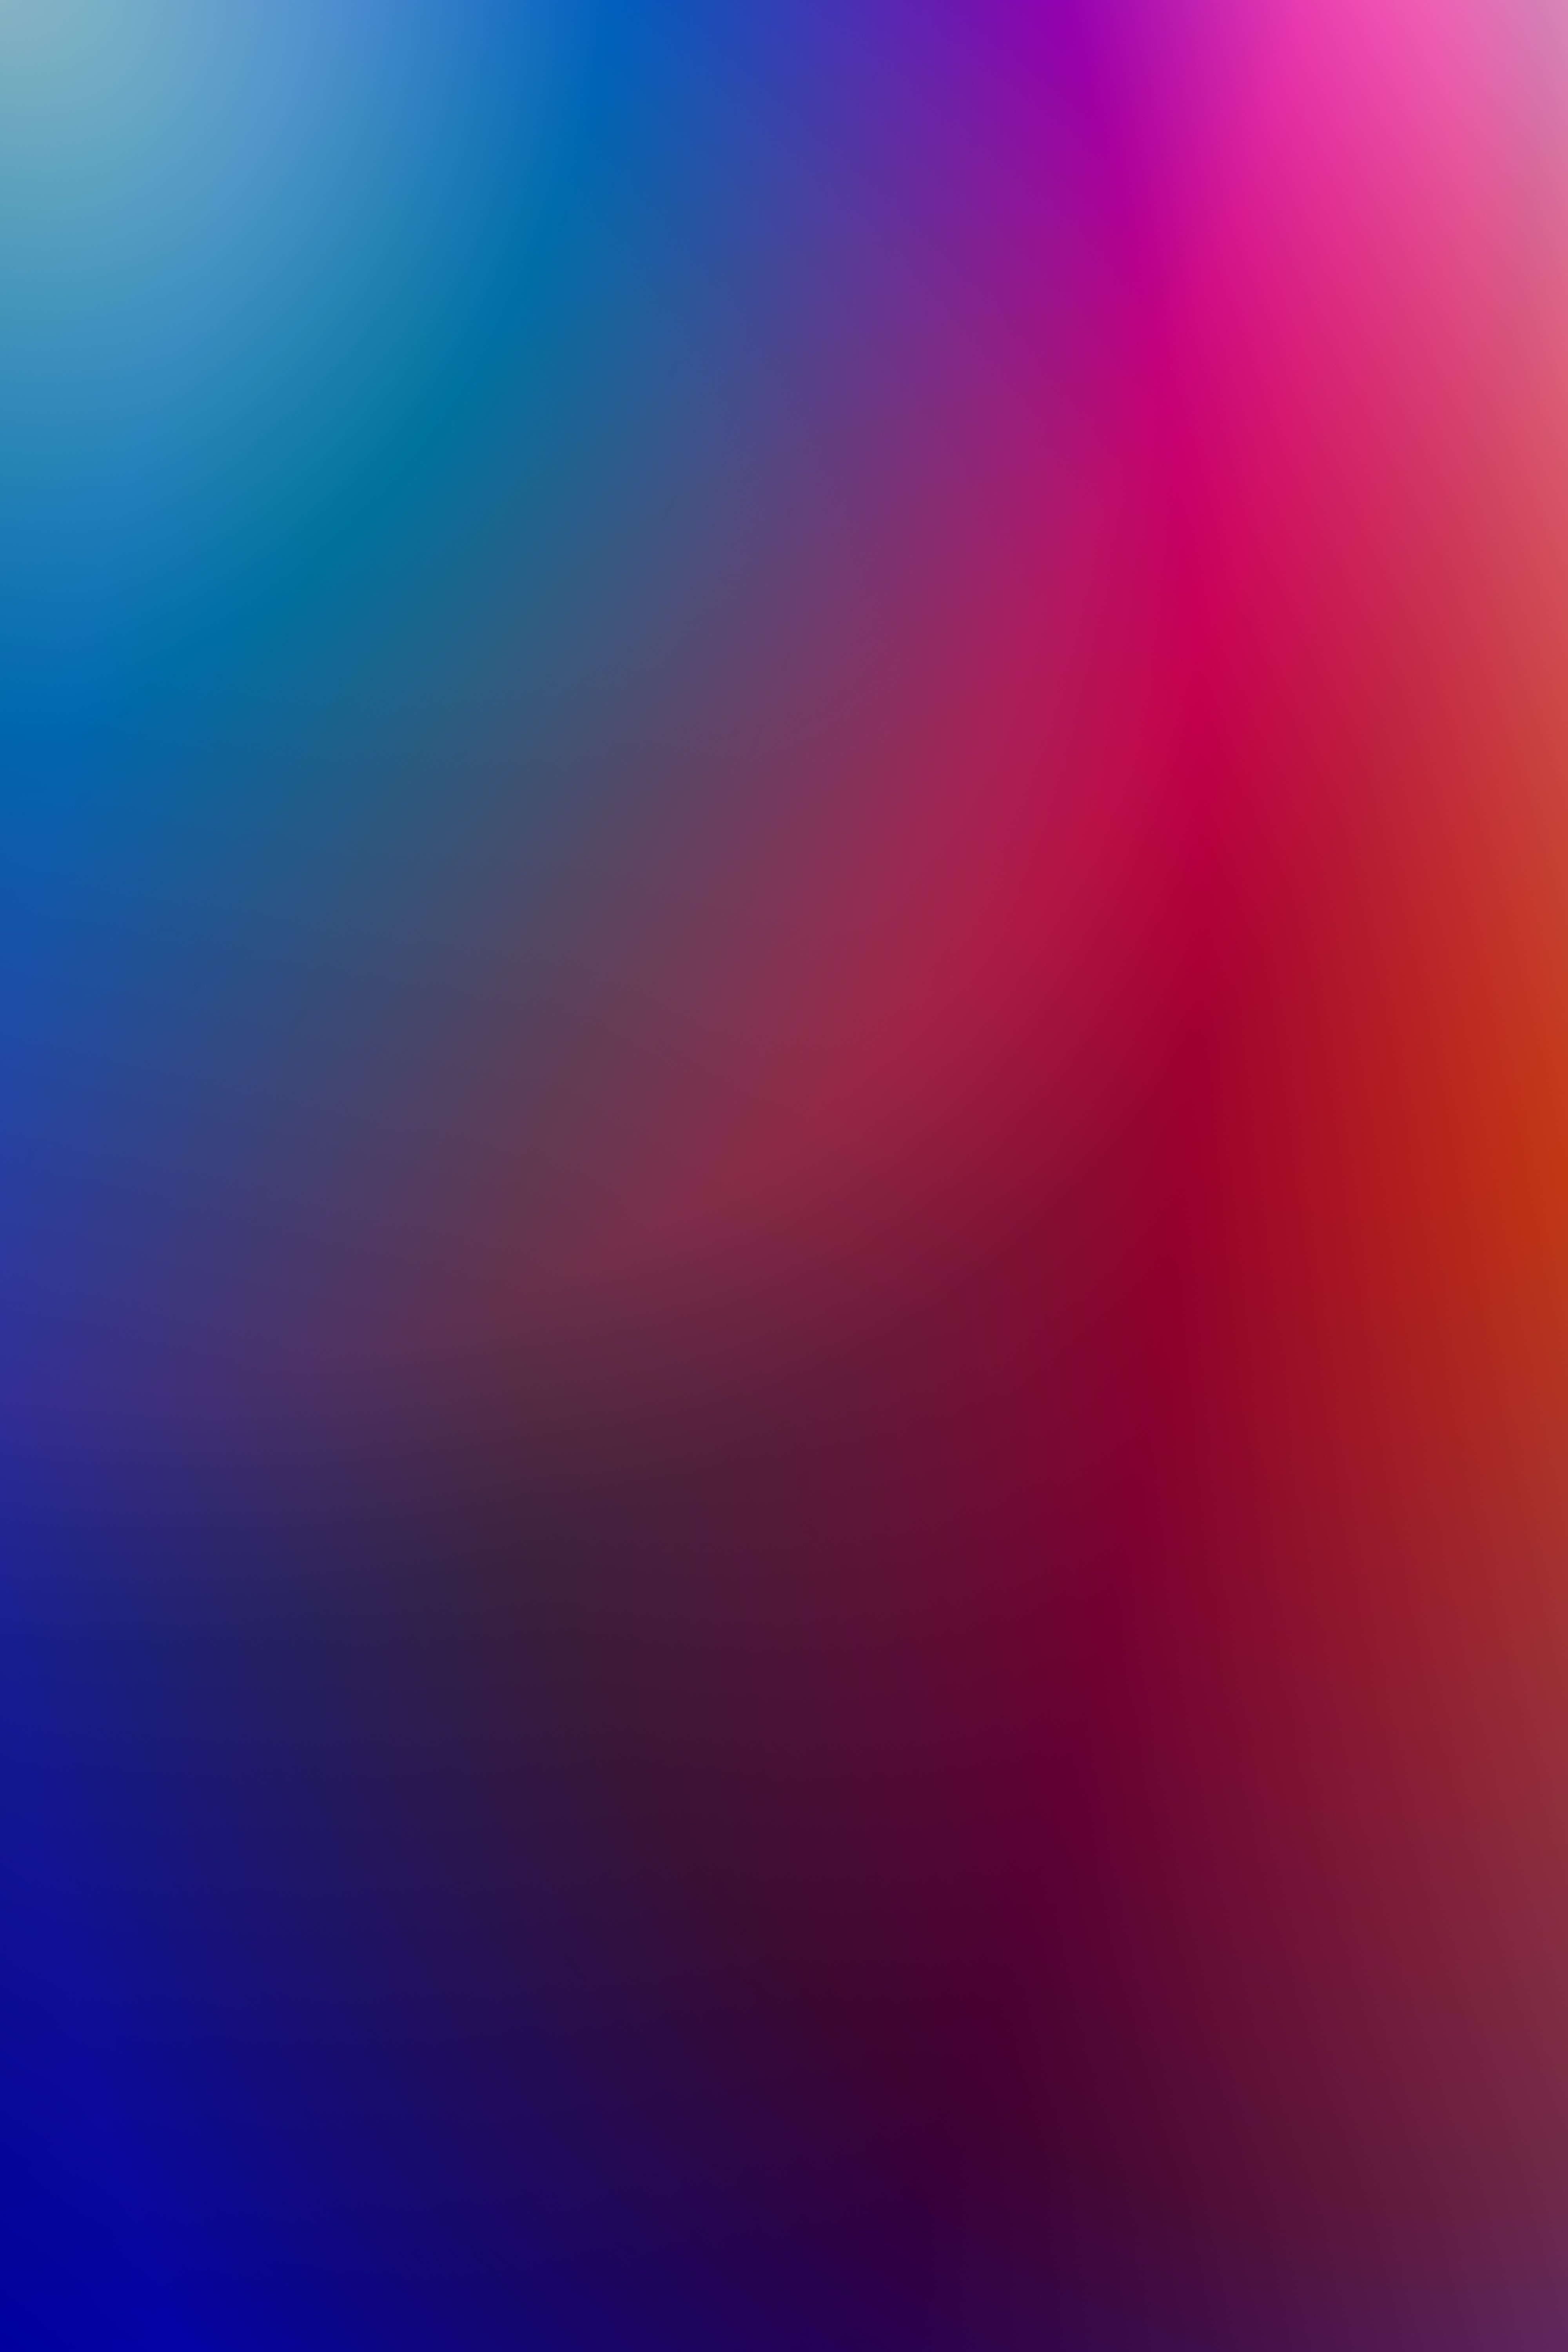 Desktop FHD stains, abstract, multicolored, motley, spots, gradient